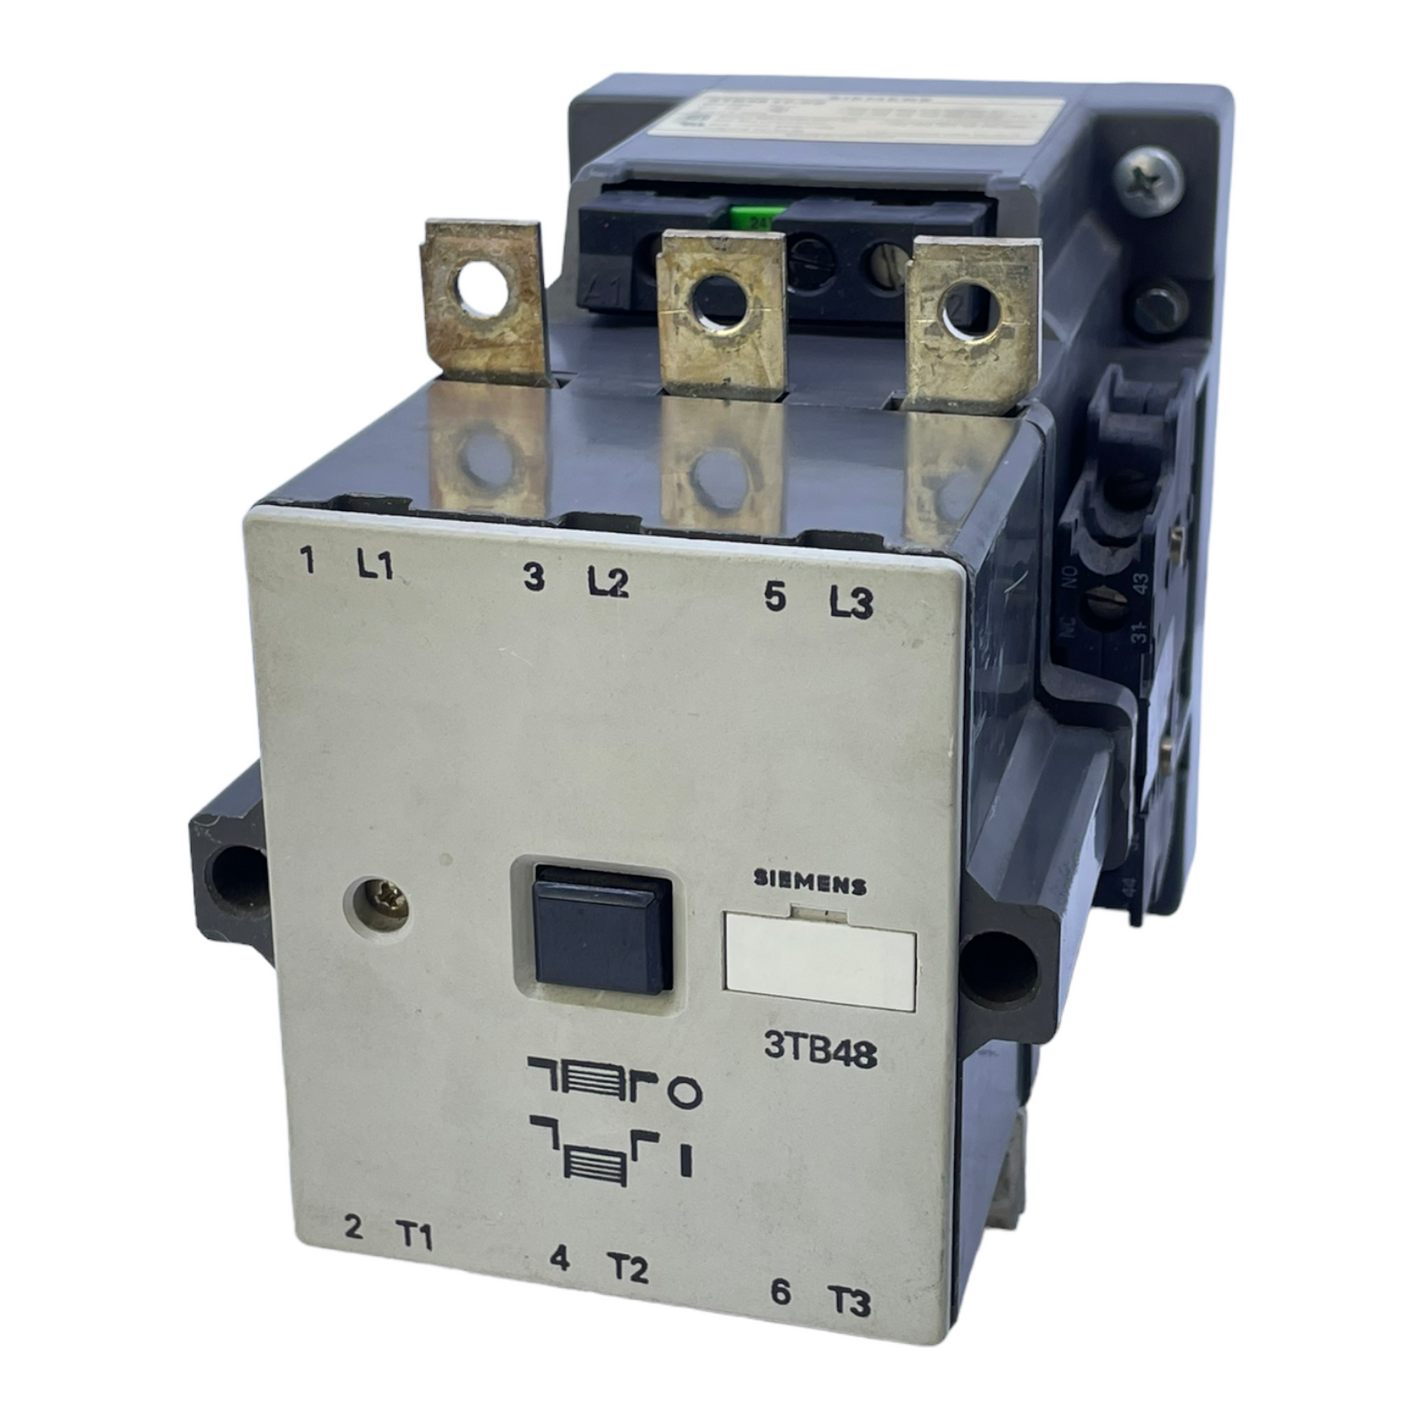 Siemens 3TB4817-0B power contactor 24V for industrial use Power contactor